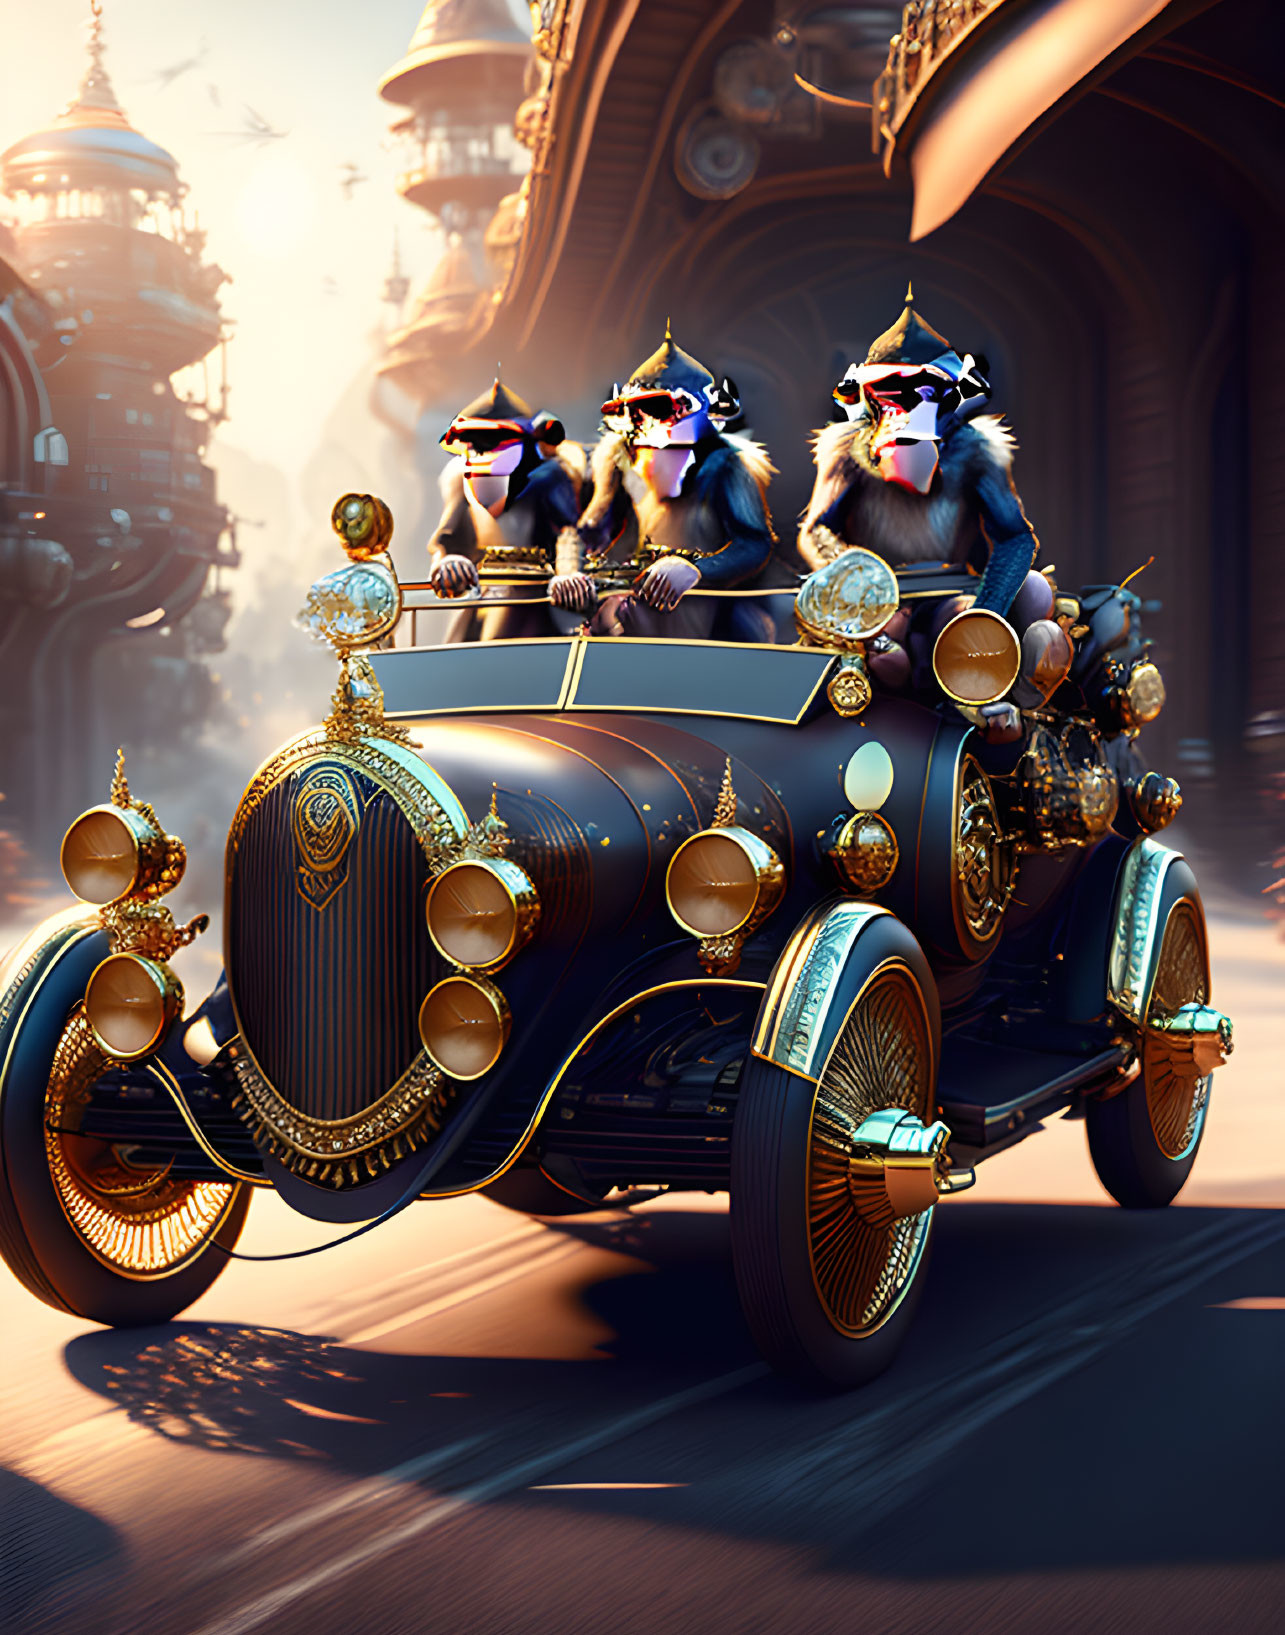 Baboon characters in royal attire drive vintage car through fantastical city